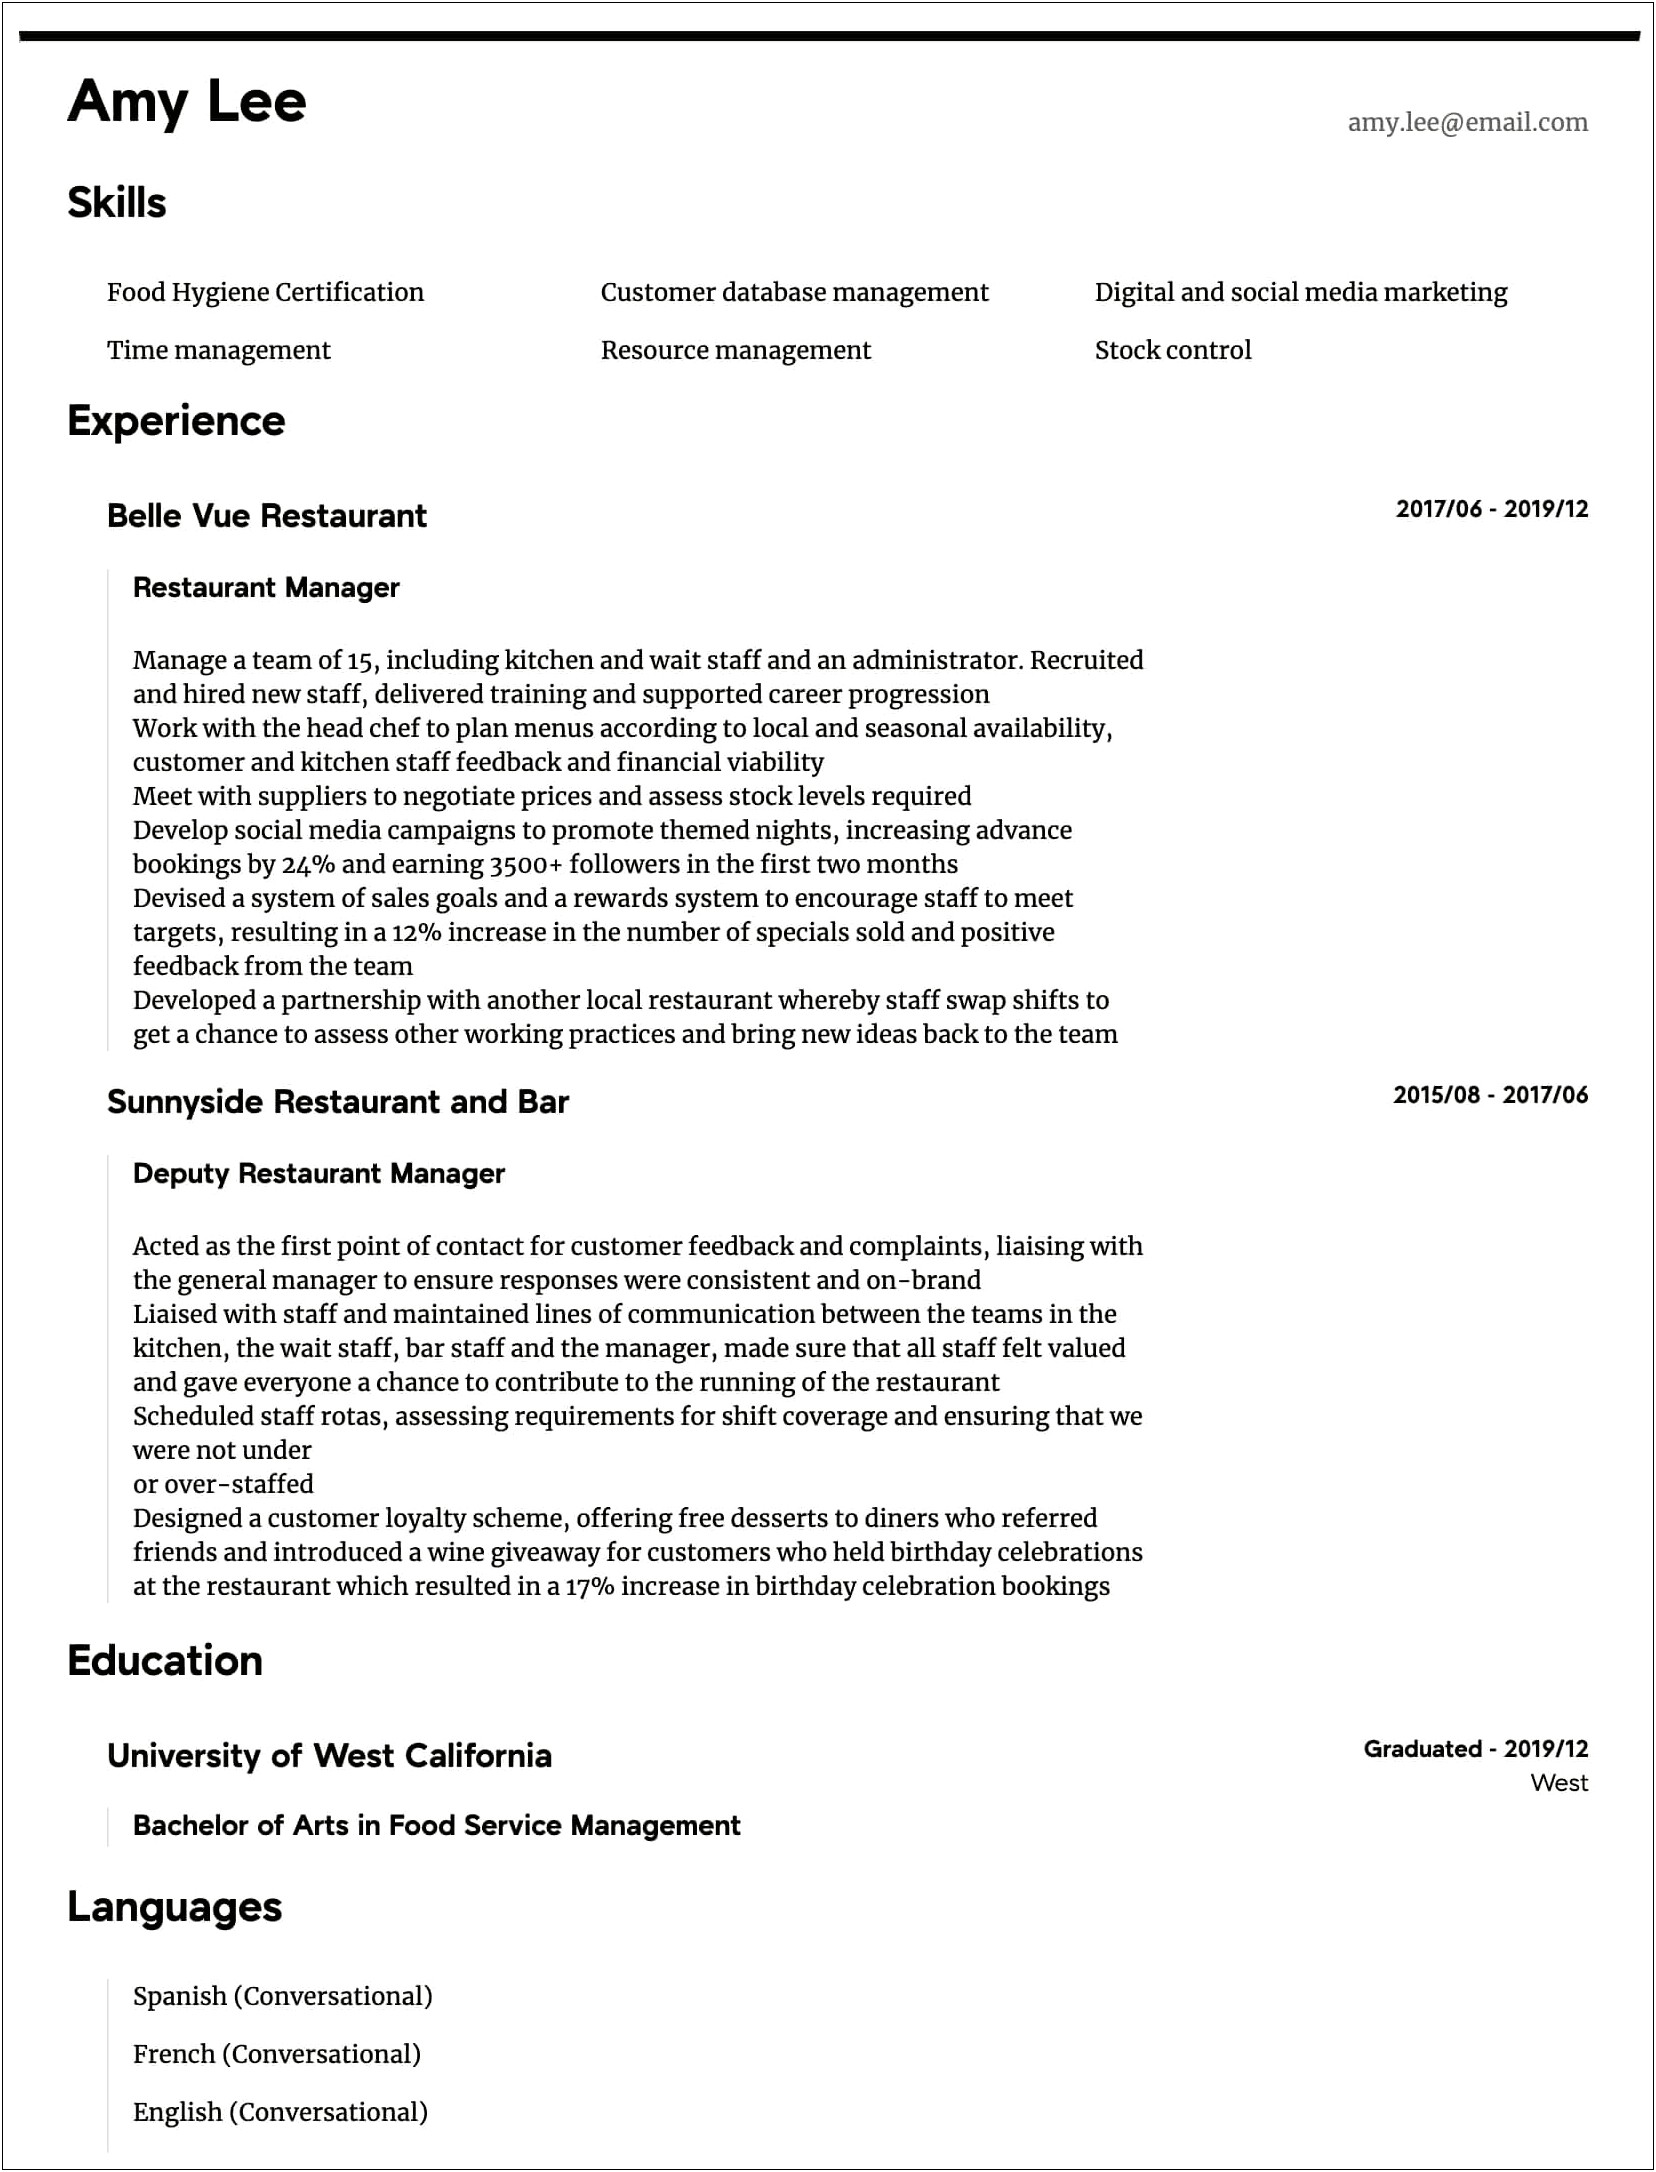 Sample Resume Objectives For Food Service Manager